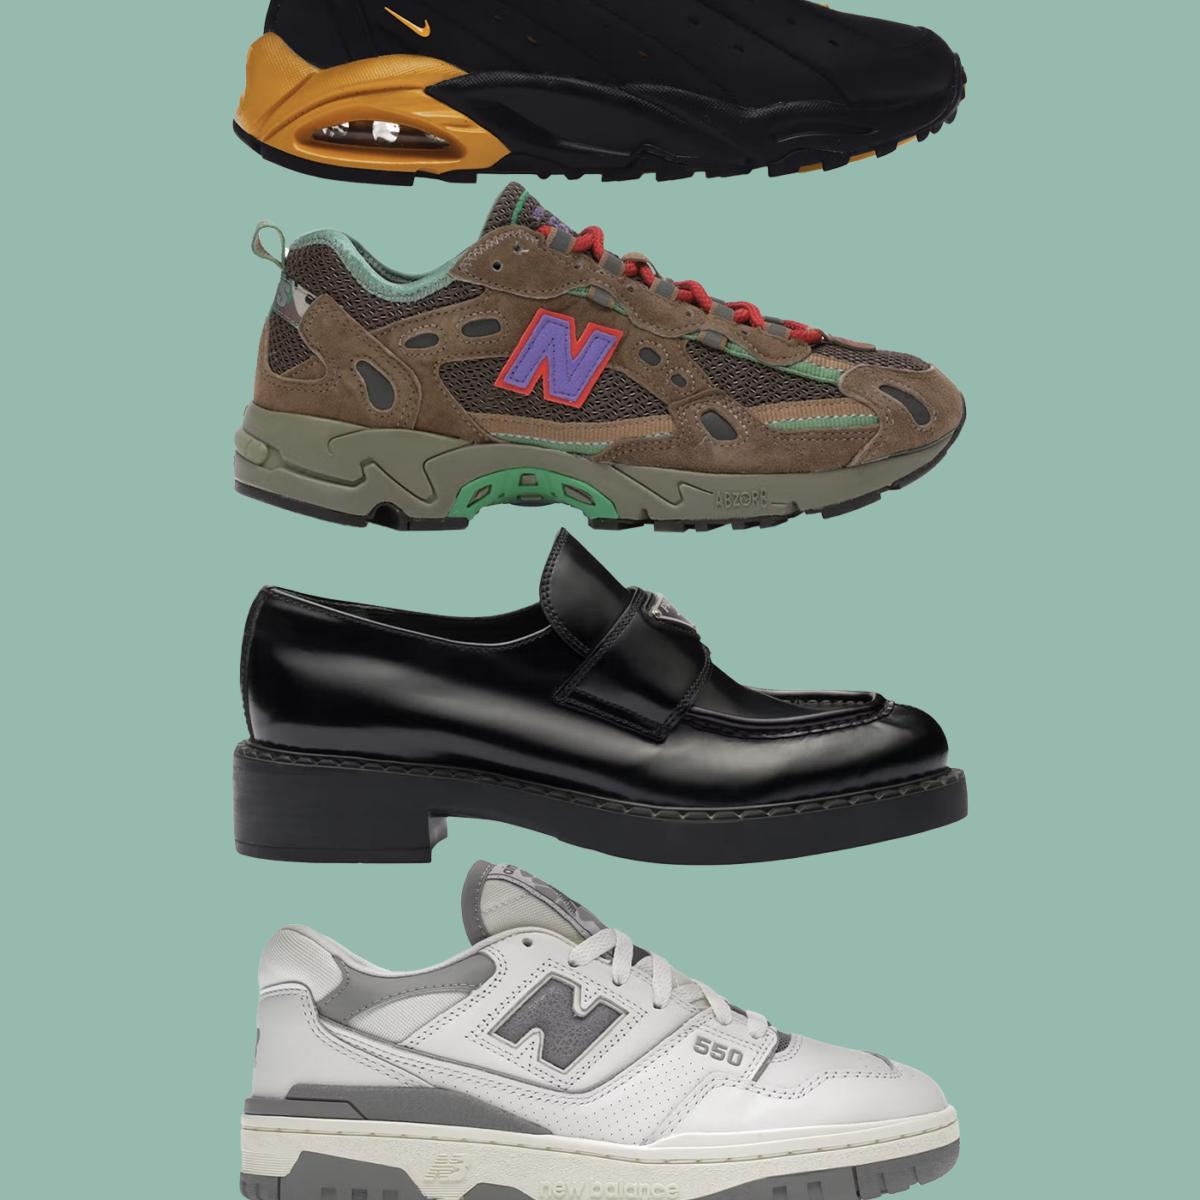 Buy Louis Vuitton Trailblazer Shoes: New Releases & Iconic Styles